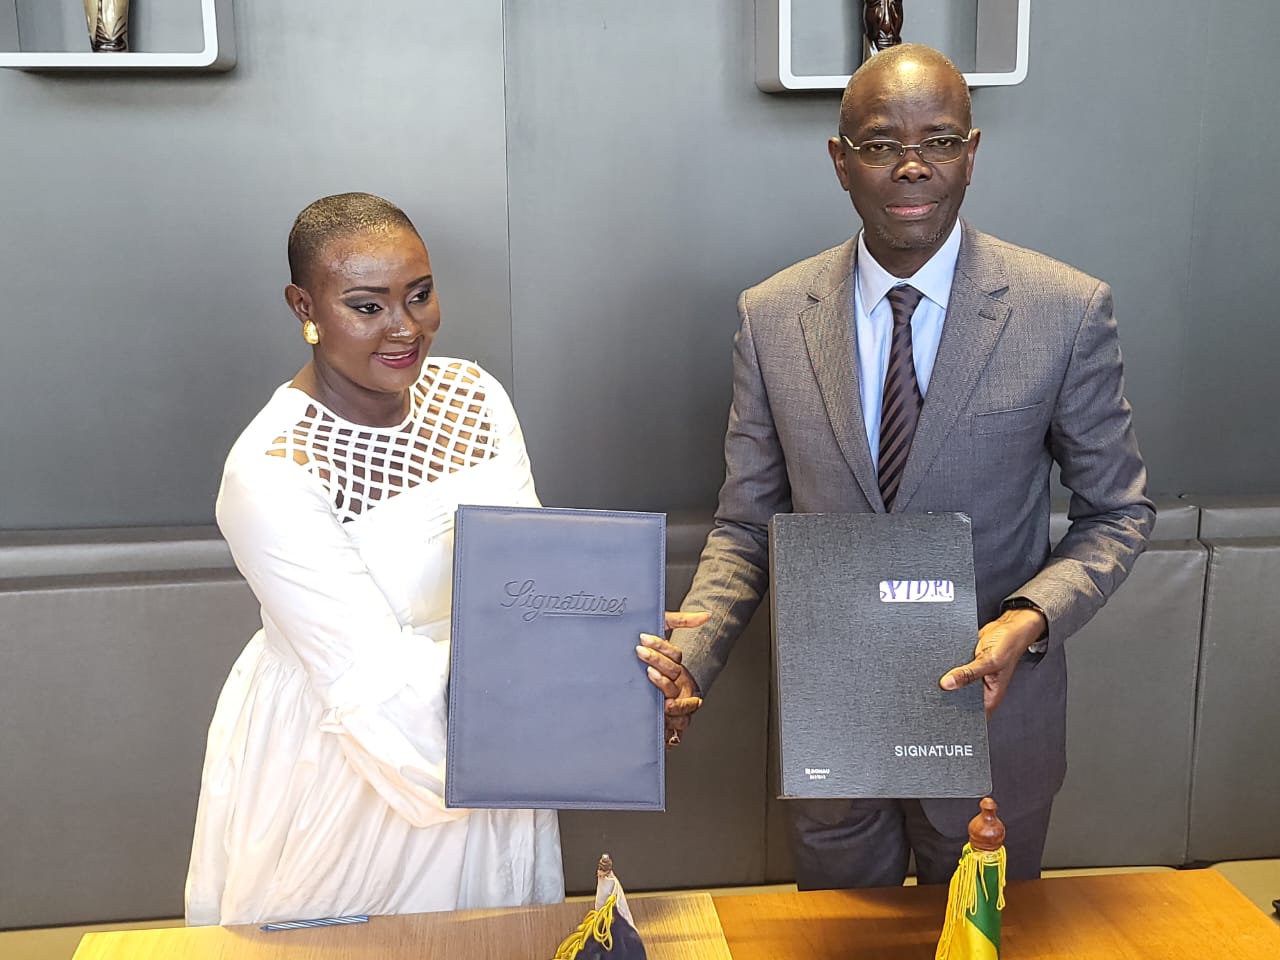 To Enhance Fight Against Illegal Fishing and Related Activities – Liberia Signs Fishery MoU with Senegal